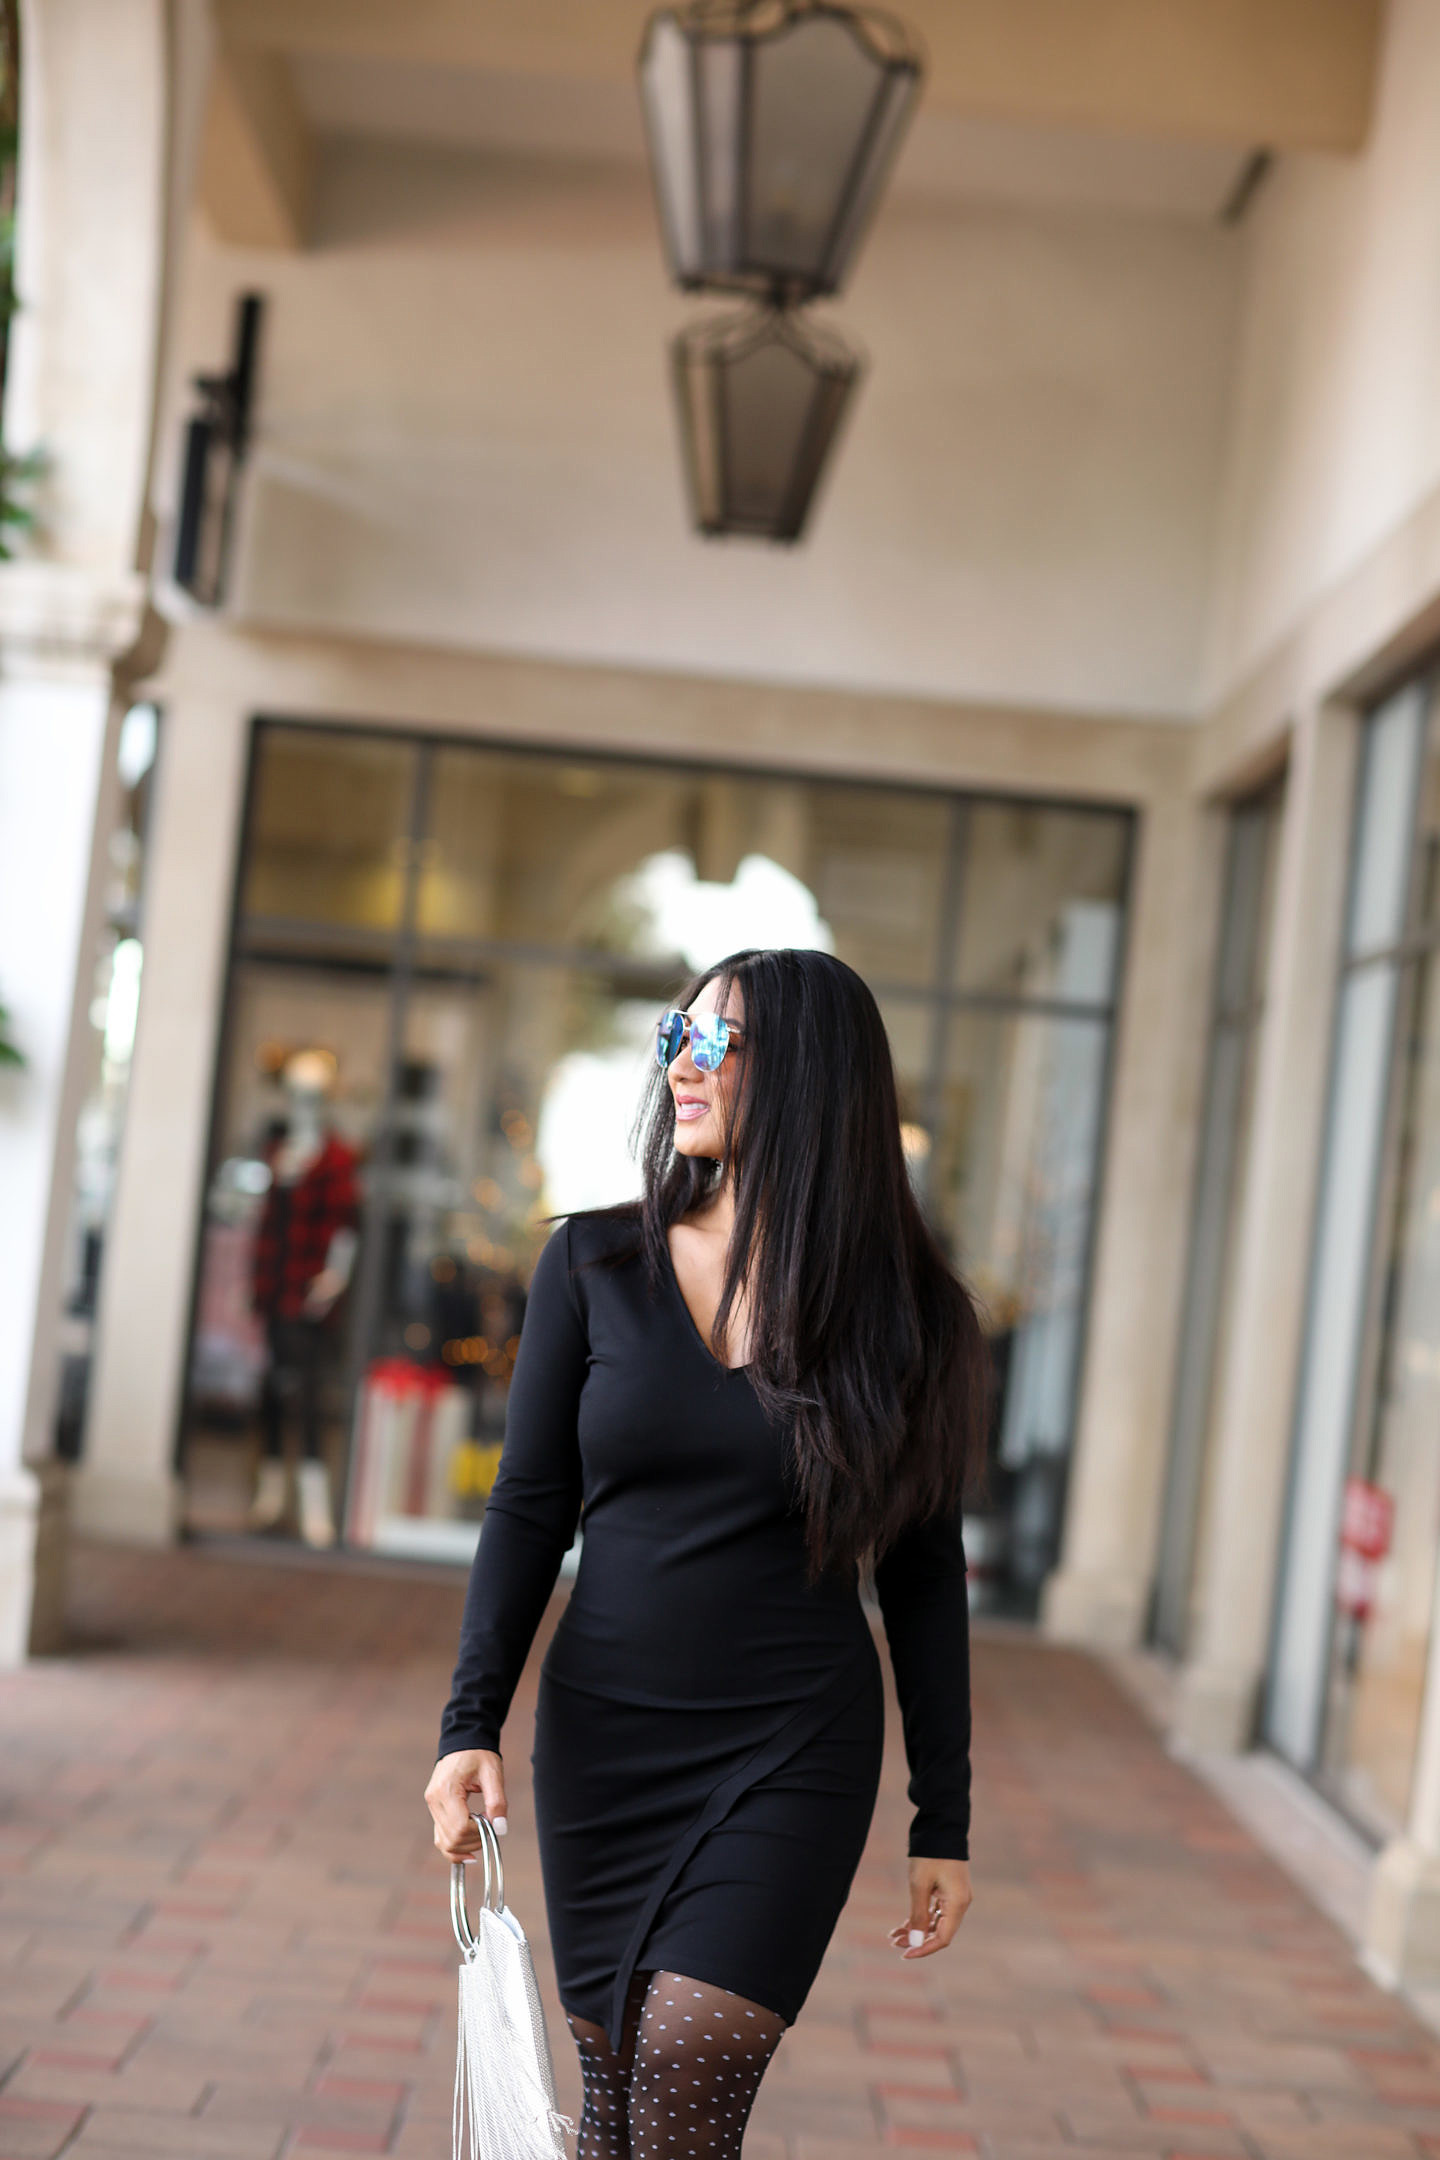 Looking for the perfect LBD this season? Orange County Blogger Debbie Savage is sharing her favorite LBD wirh unexpected details here!